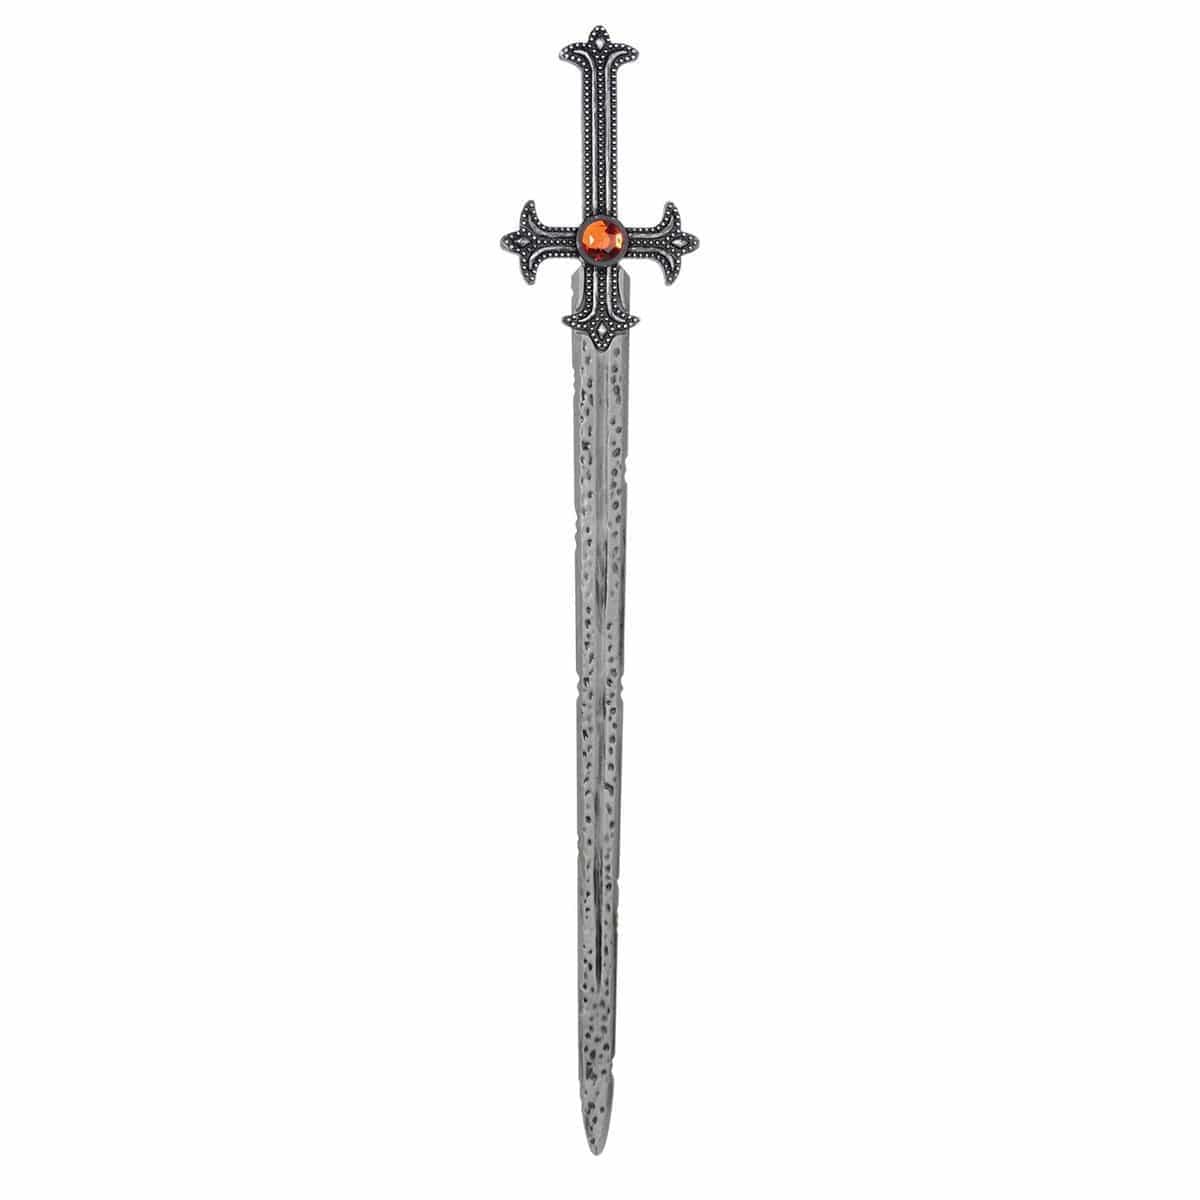 Buy Costume Accessories Crusader sword sold at Party Expert